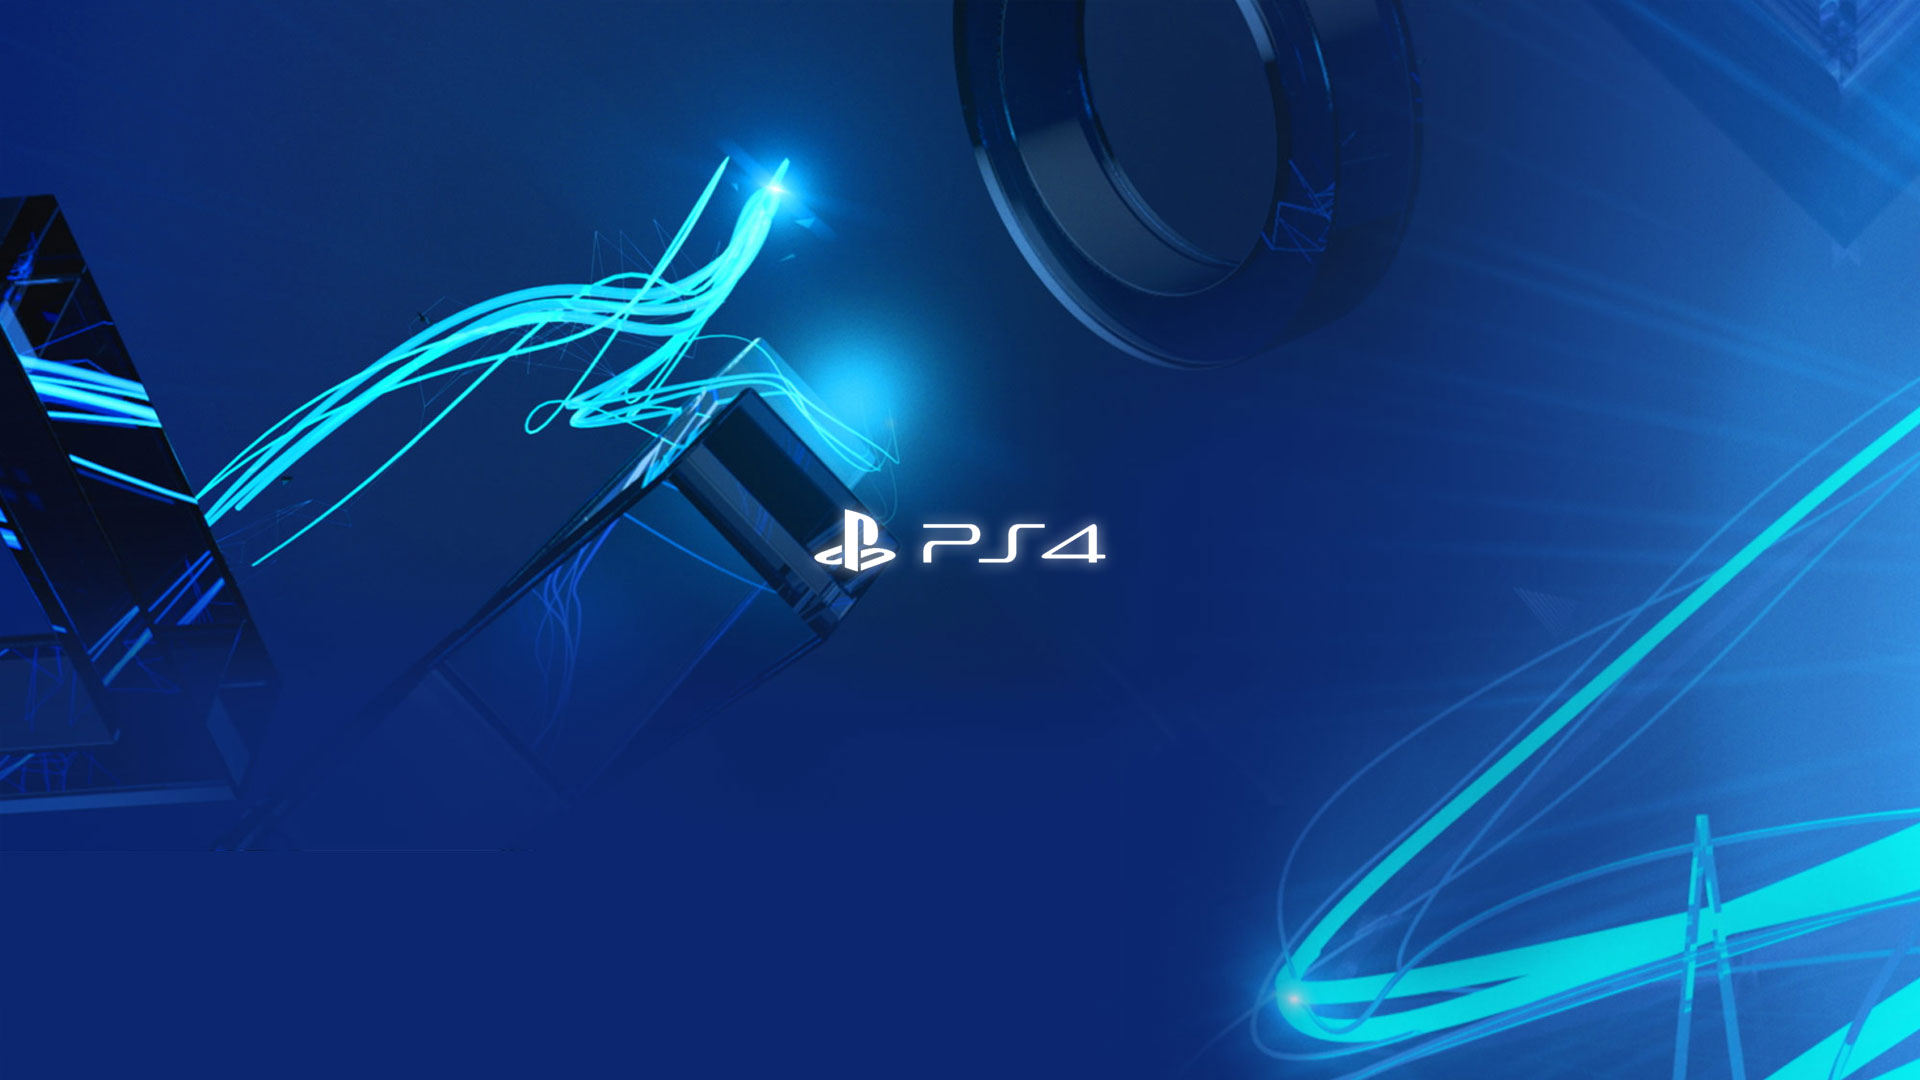 HD Sony Ps4 Wallpaper Themes Full Size - HiReWallpapers 4078